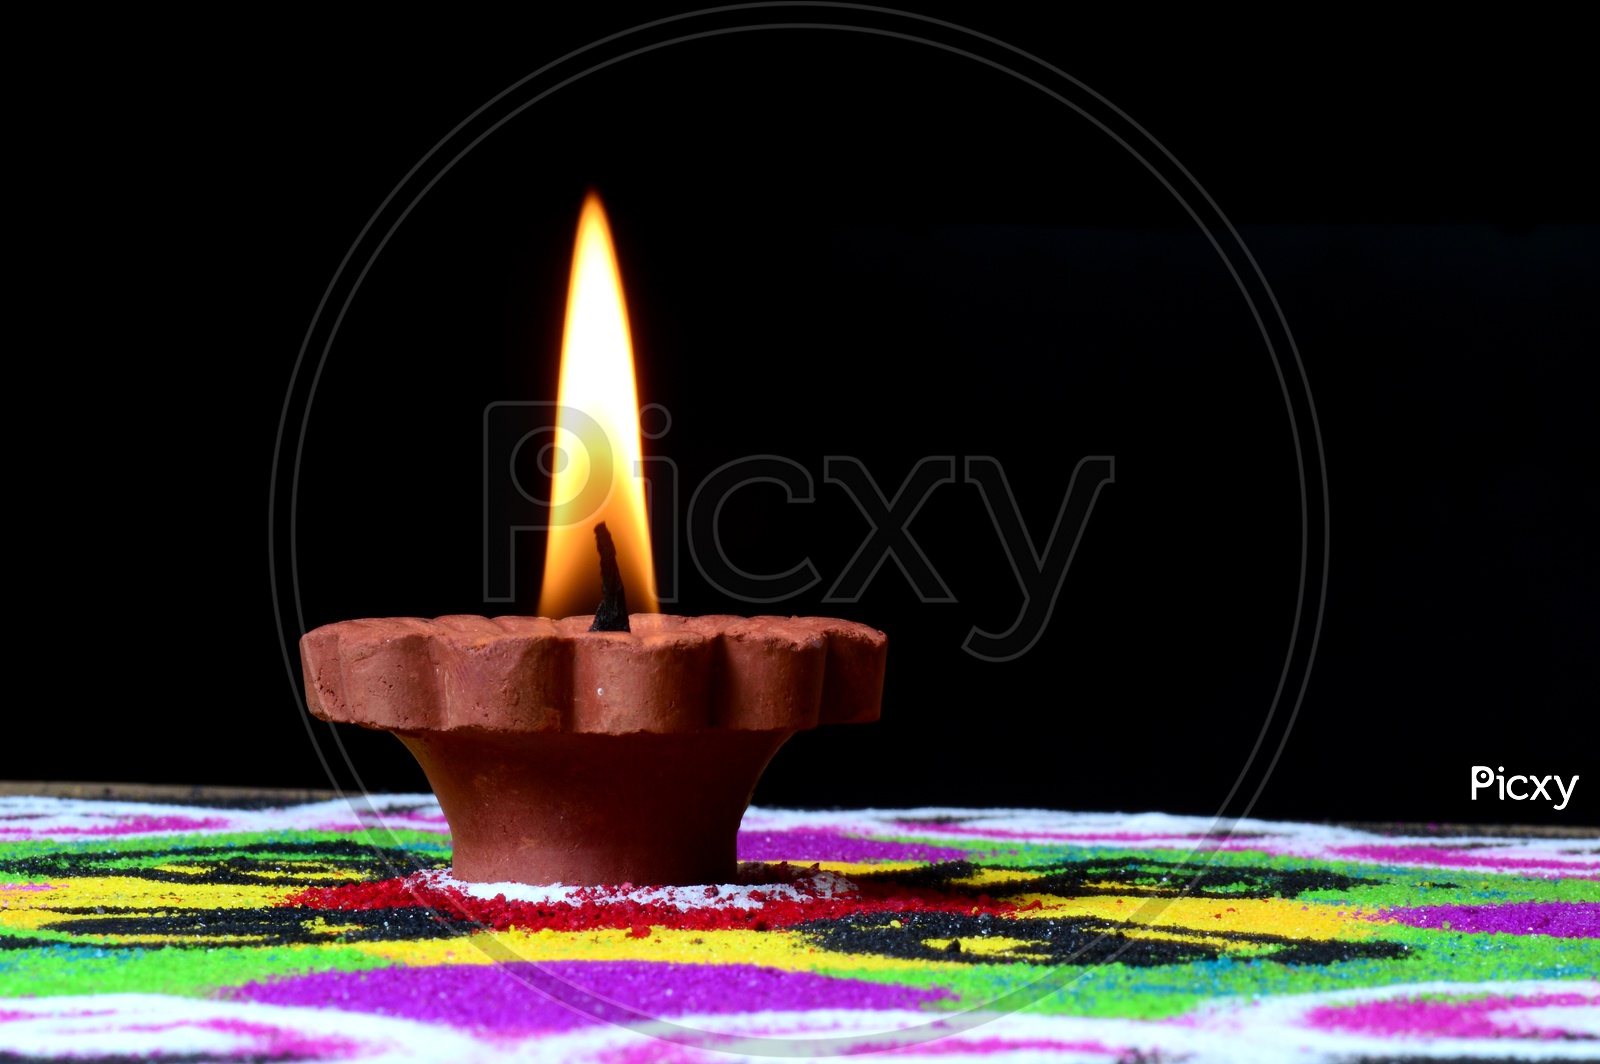 Image of Indian Festival Diwali Clay Diyas In Colorful Rangoli For ...